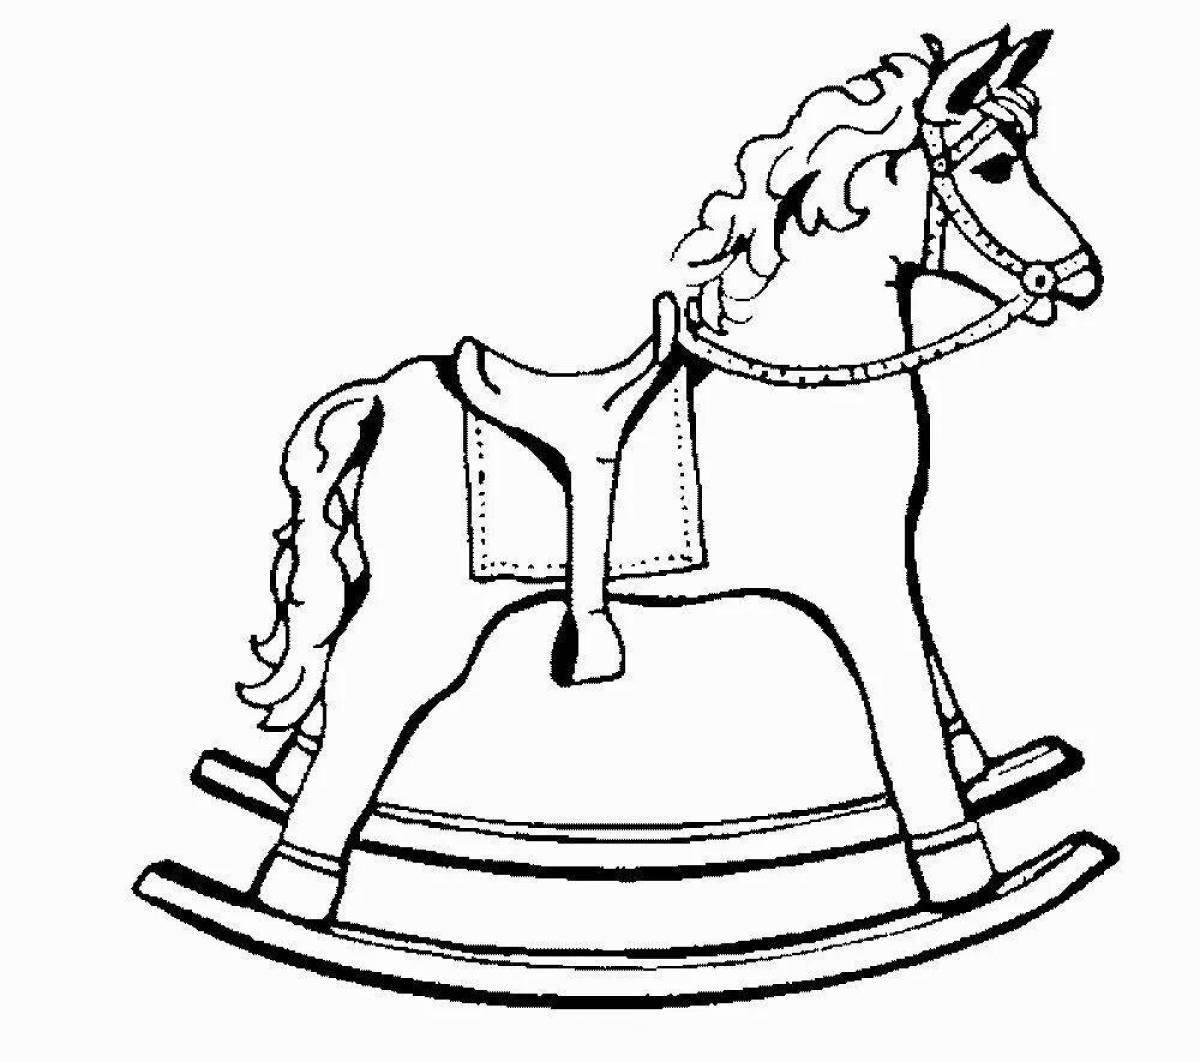 Fun rocking horse coloring book for kids